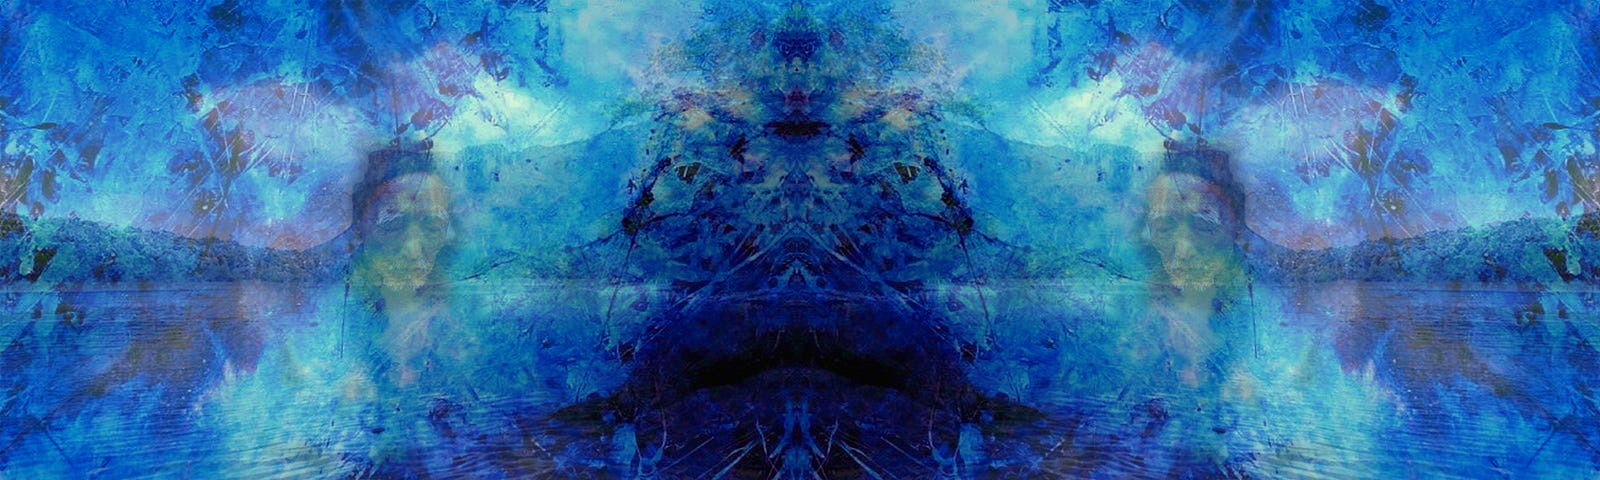 Photo all in blue. Three layers; 1. background paisley coastline, 2. old Chinese man in contemplative awareness on both sides of the image and 3. an abstract layer which looks like an ancient animal face. The layers represent our wishful thinking and blue is for the abundance oflife.